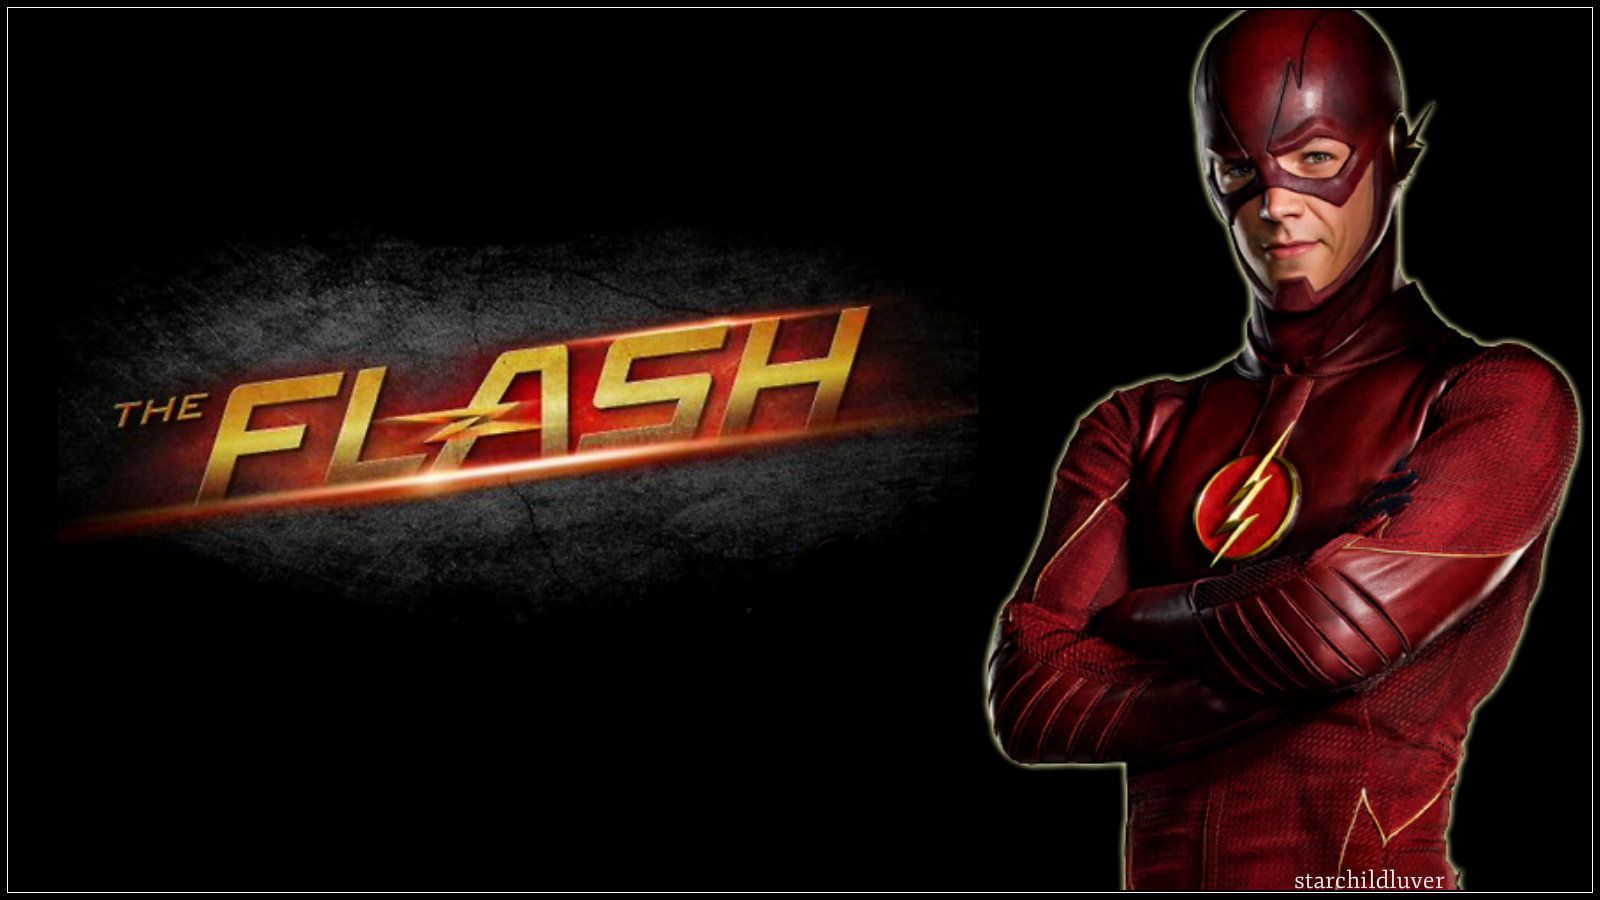 The Flash Wallpapers, HD Desktop images